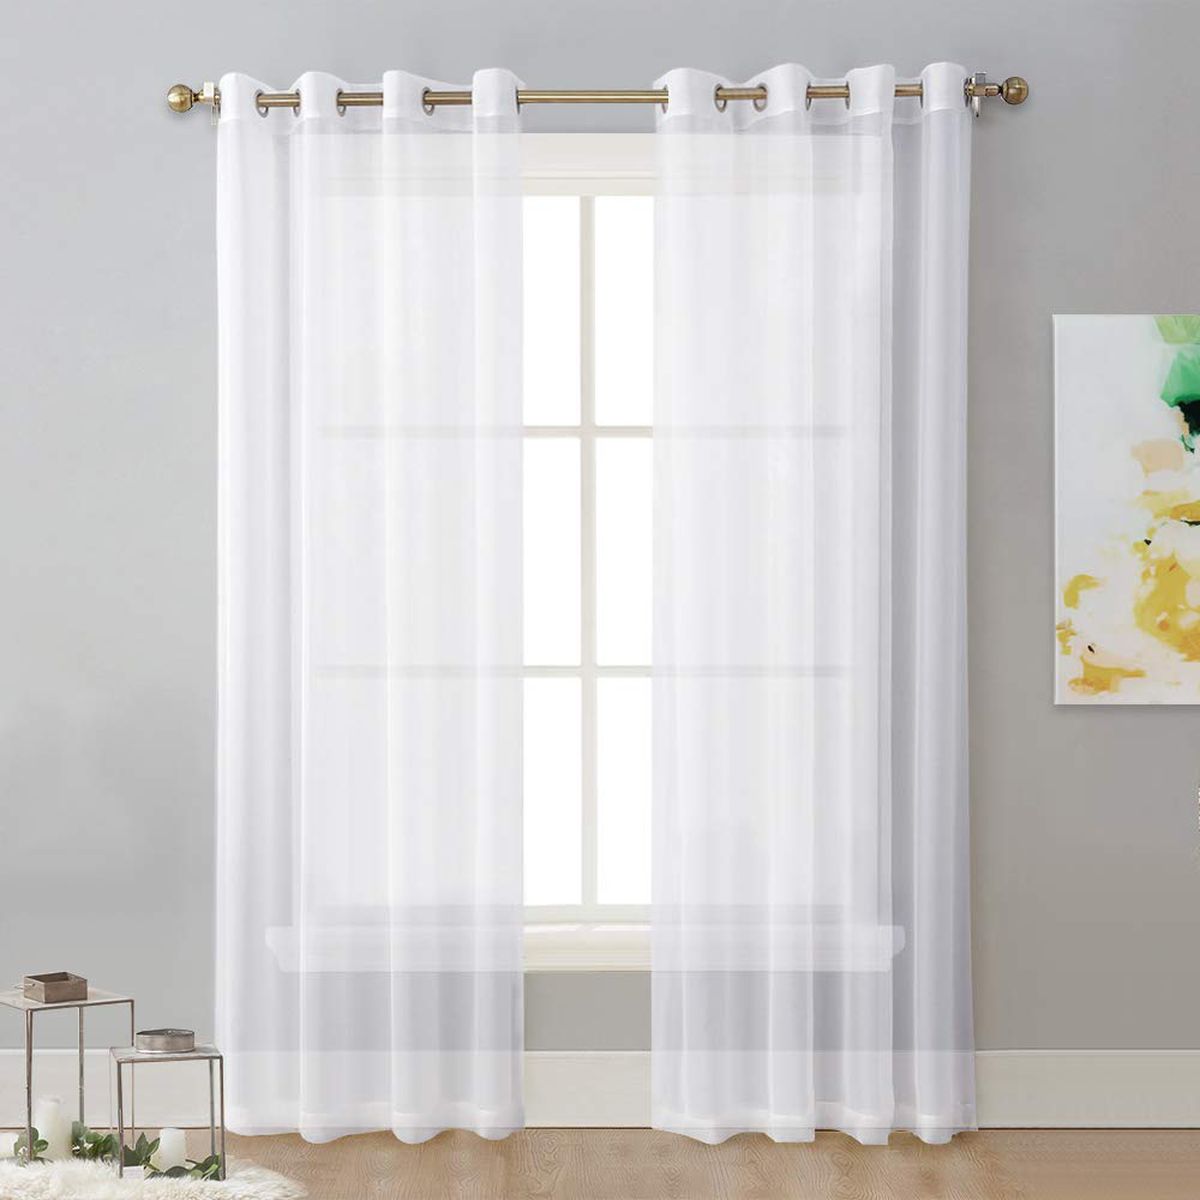 Sheer white curtains hang on a white window. The walls are gray and they feature white trim. 